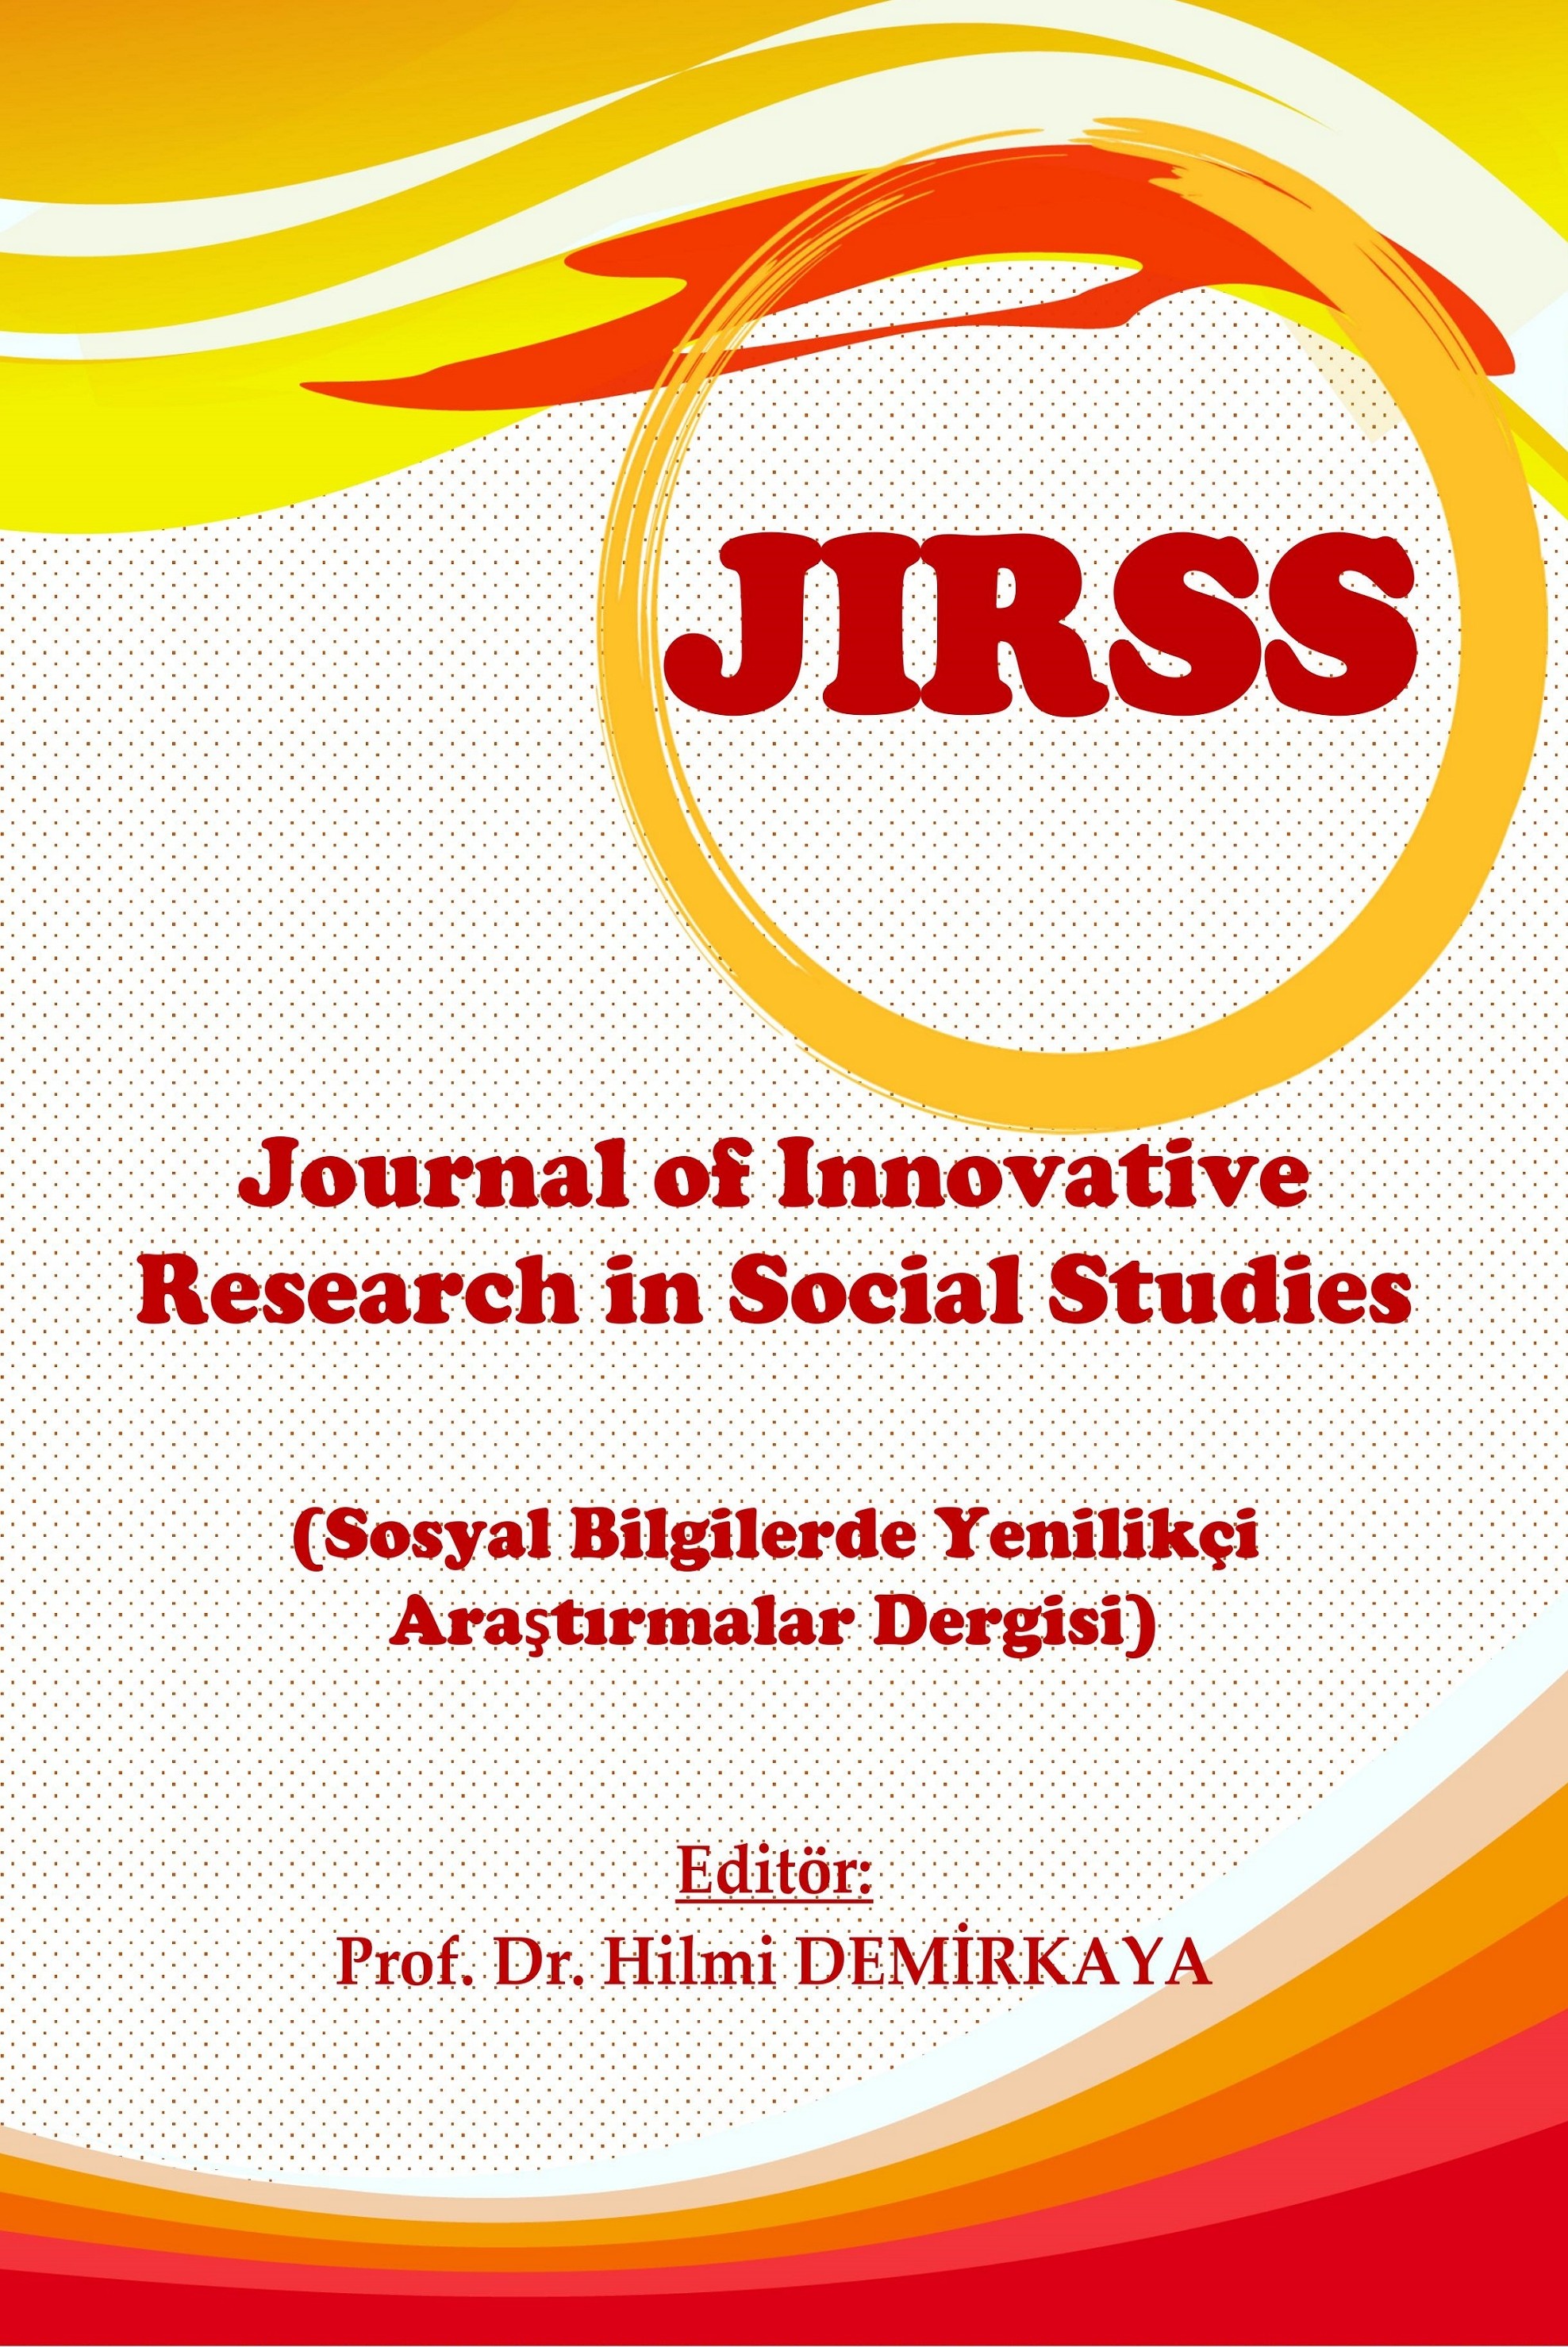 Journal of Innovative Research in Social Studies